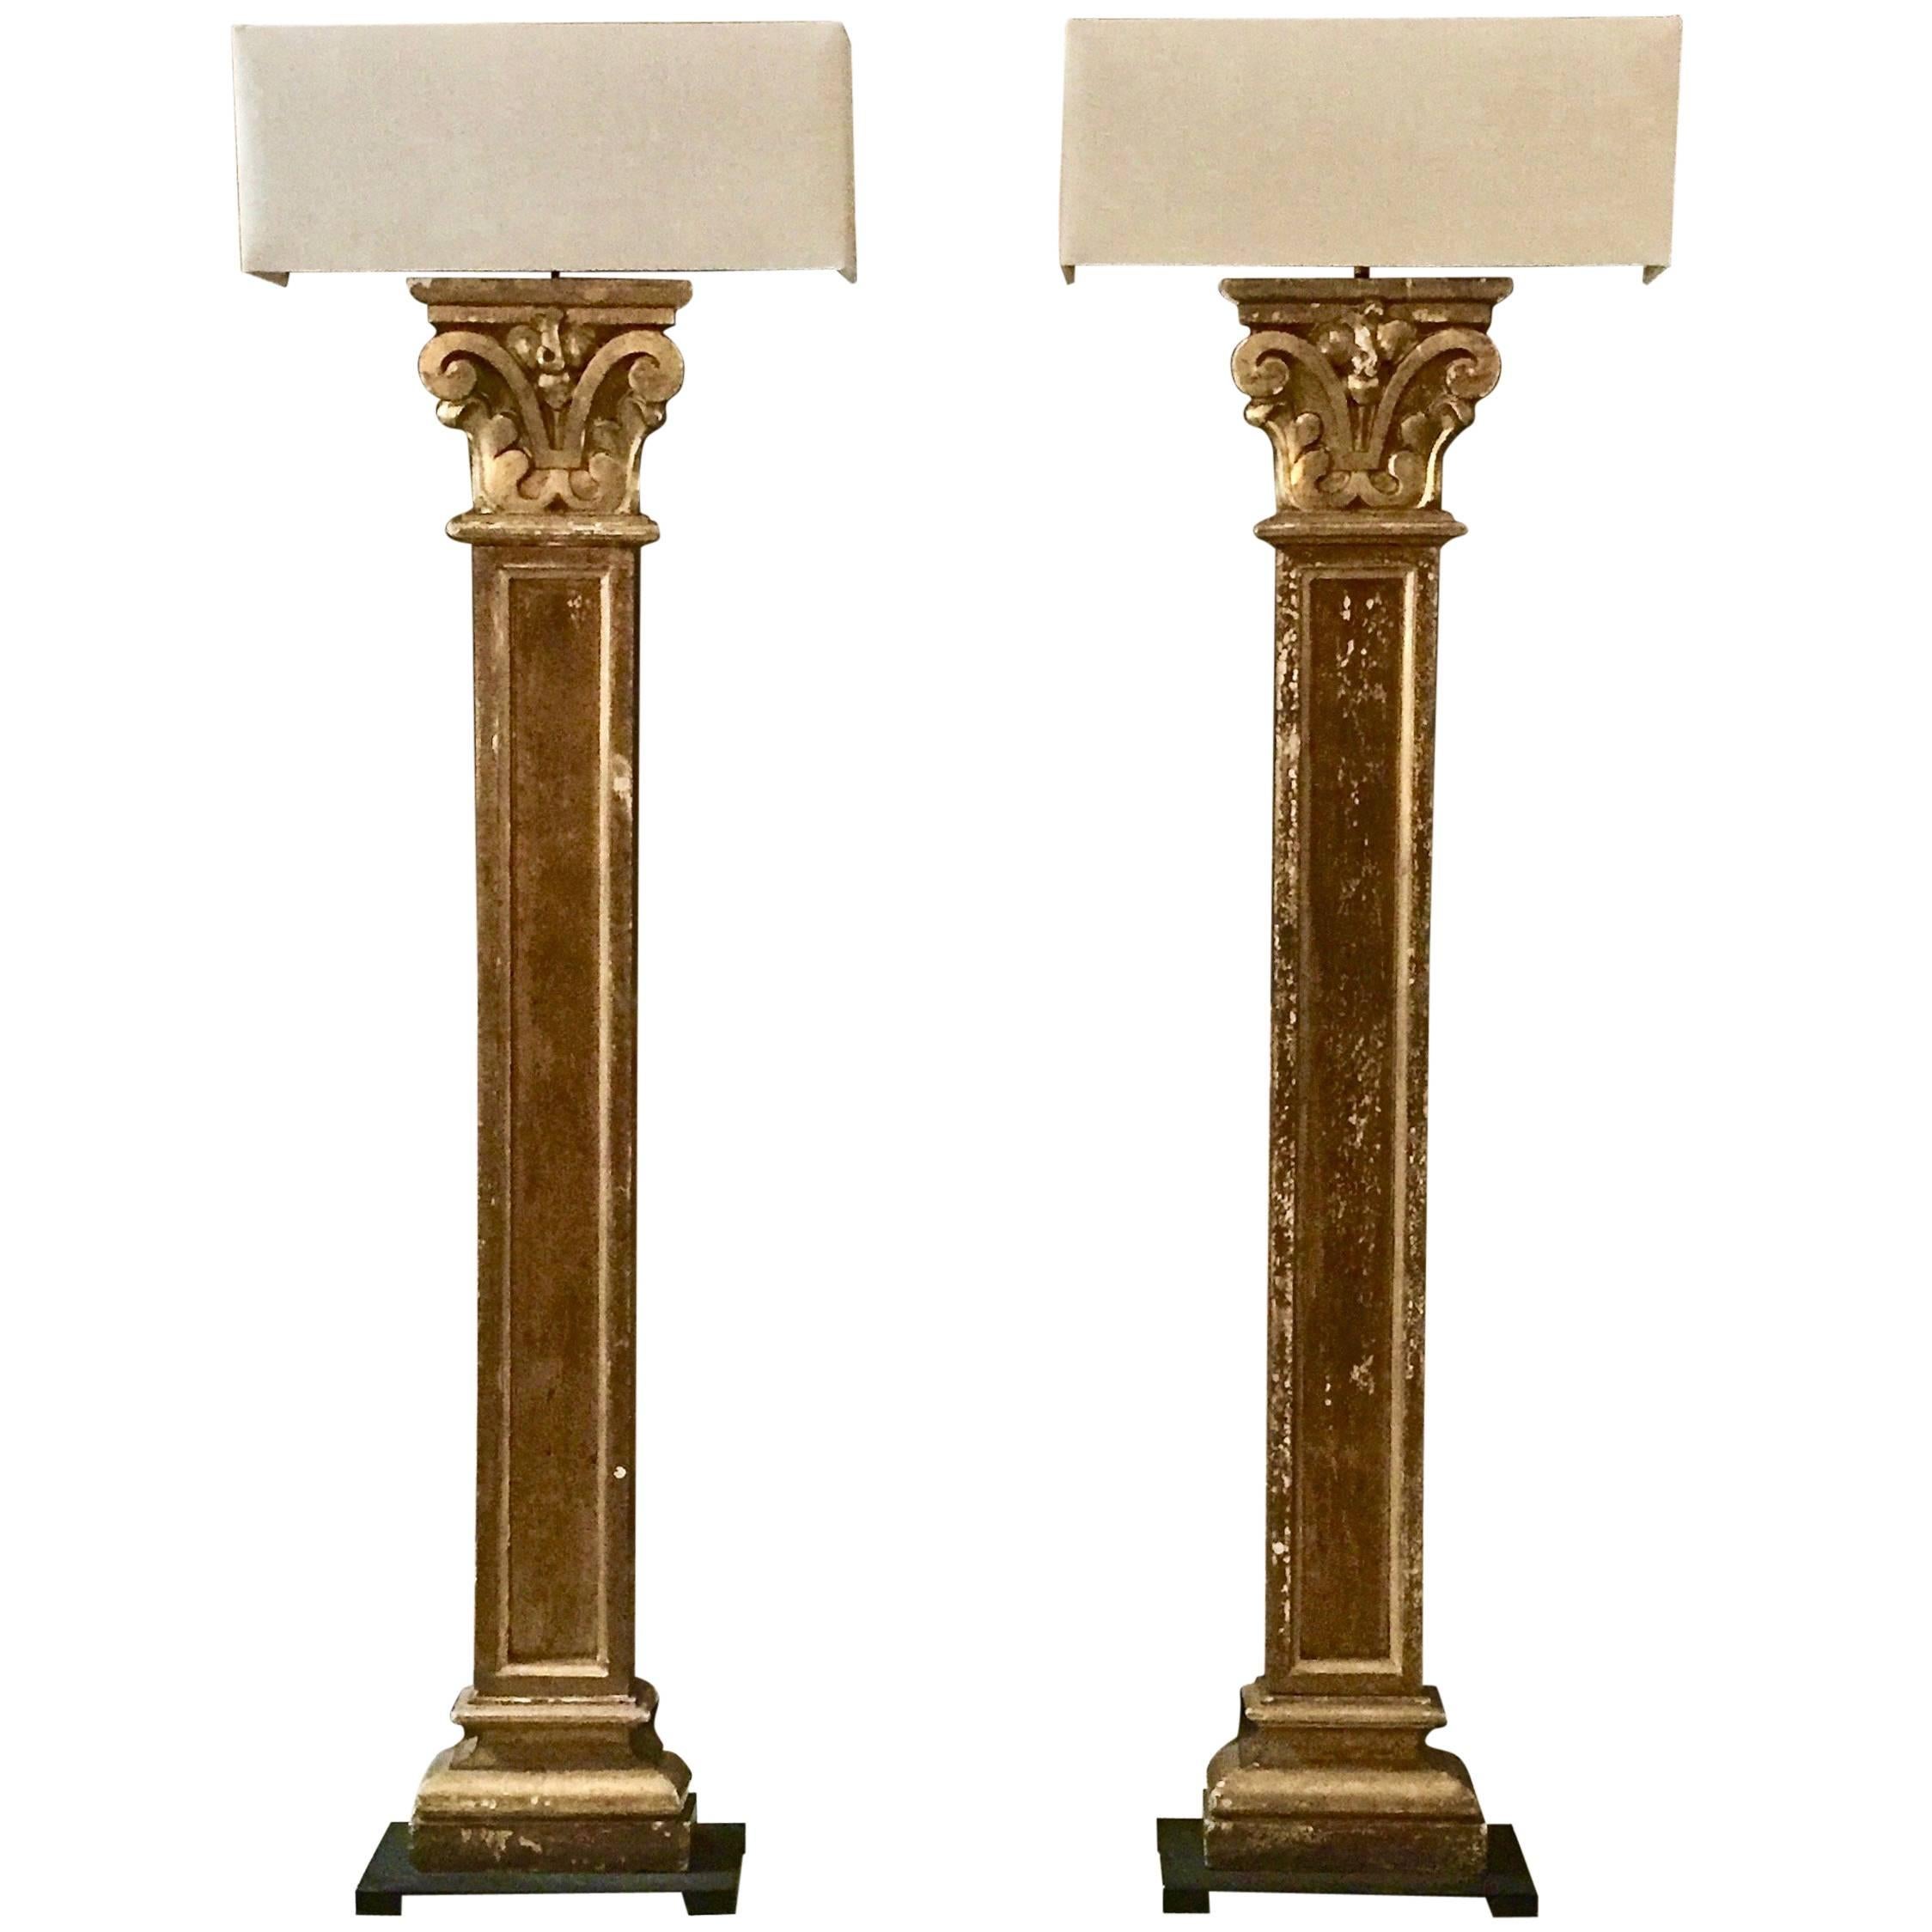 Pair of 19th century Pilaster Fragment as Floorlamps with Custommade Linen Shade